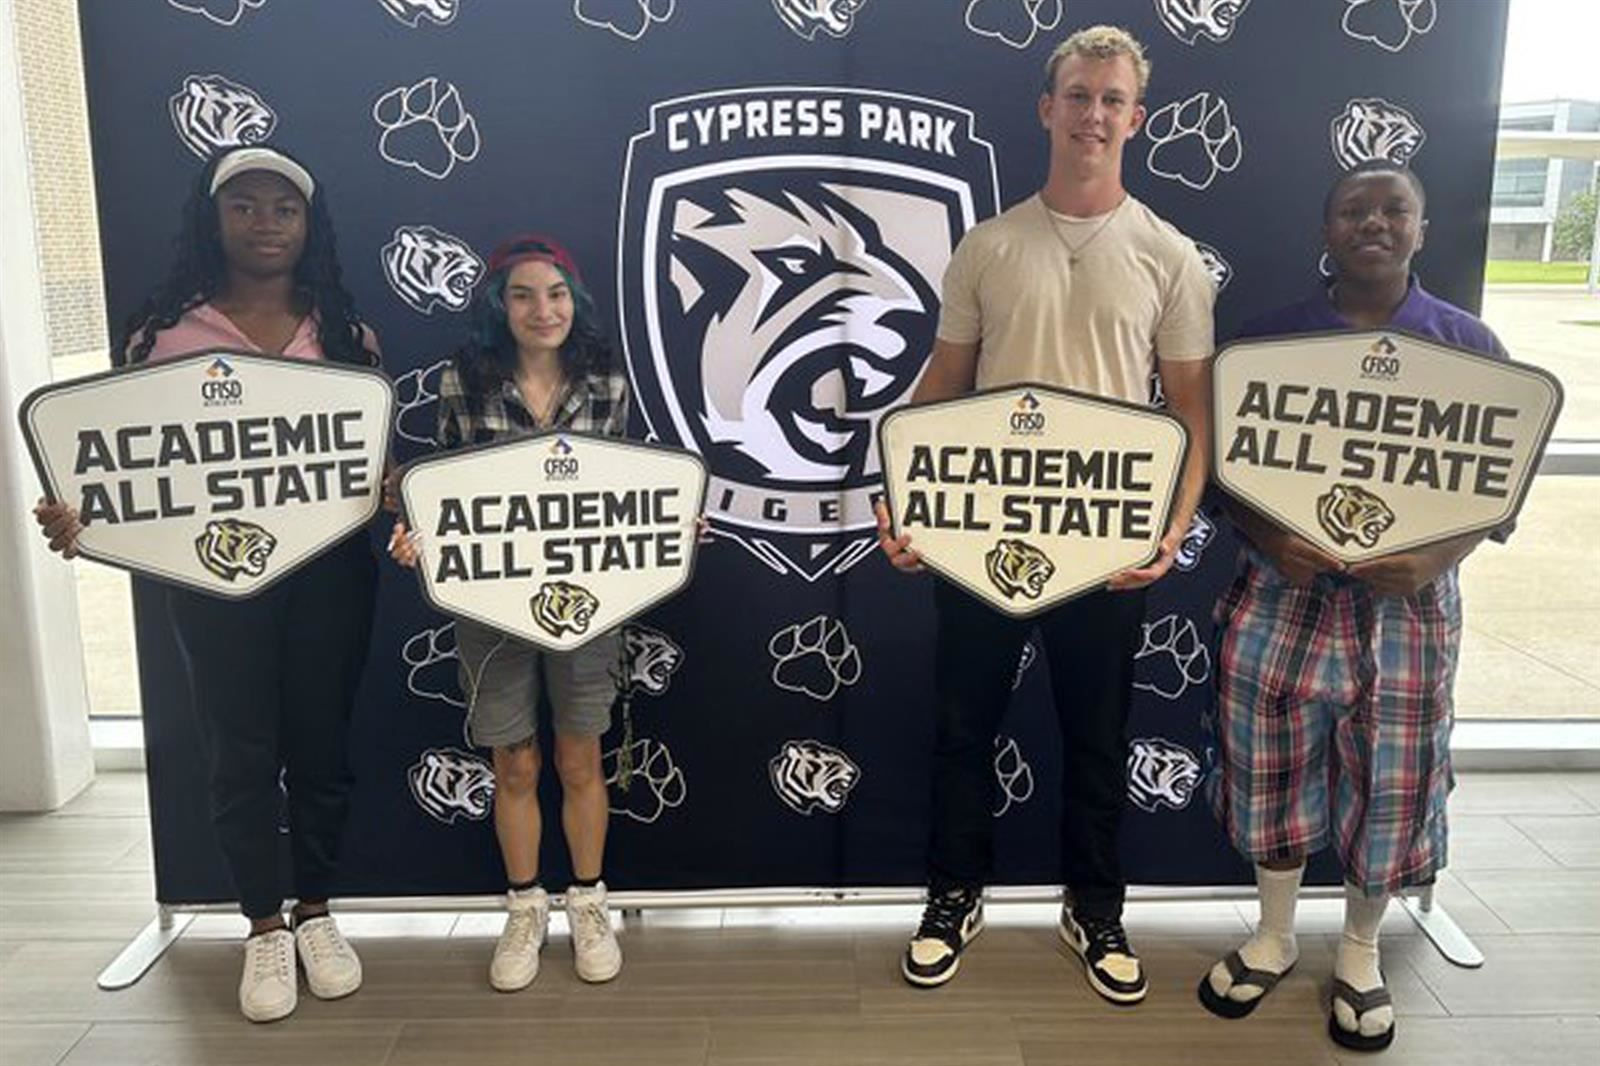 Four Cypress Park High School seniors were among 27 CFISD student-athletes named academic all-state.